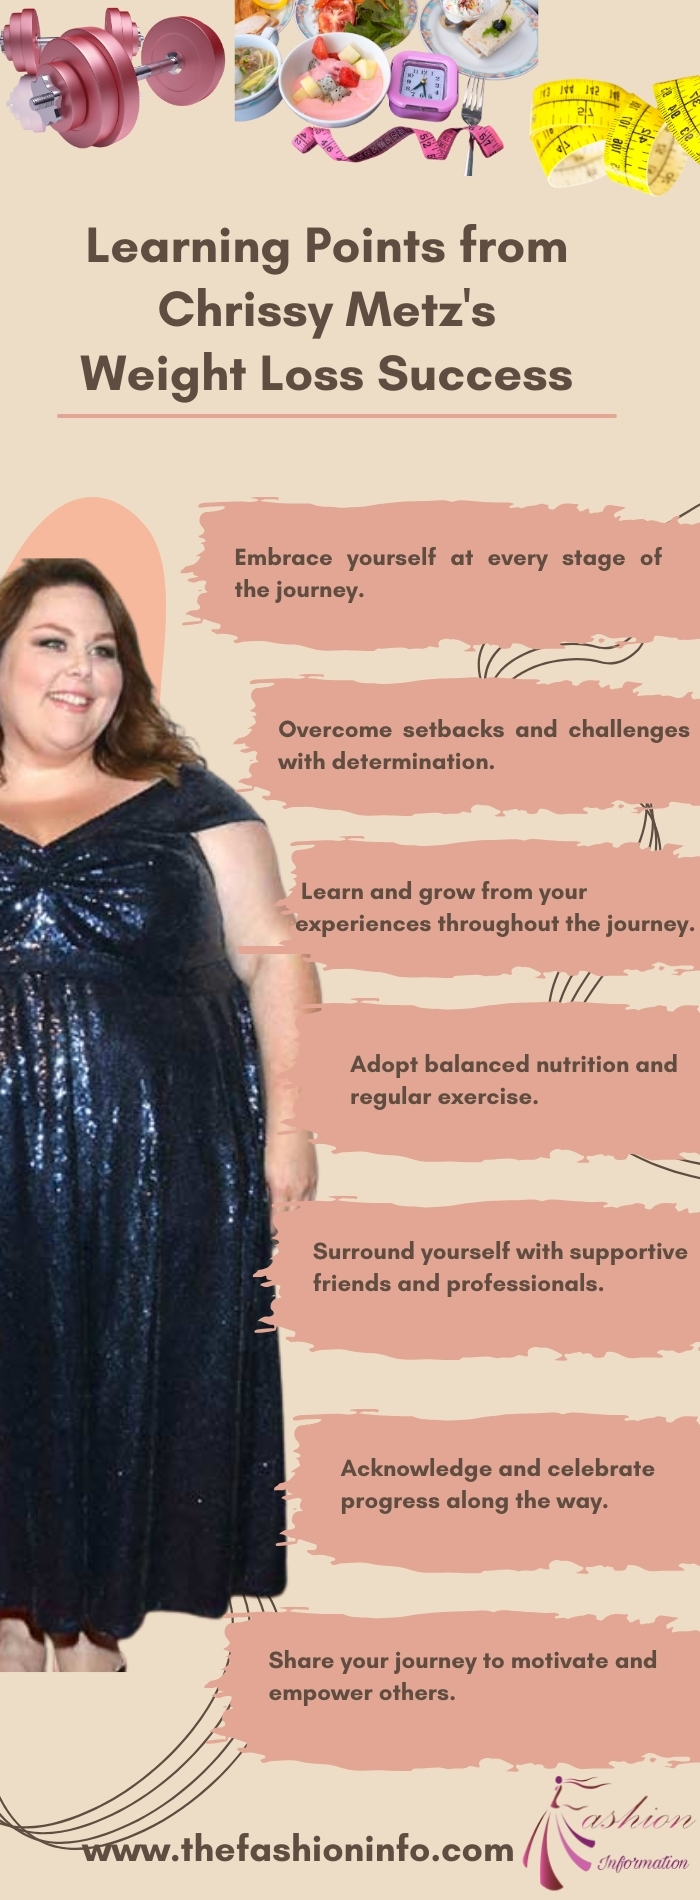 Learning Points from Chrissy Metz's Weight Loss Success